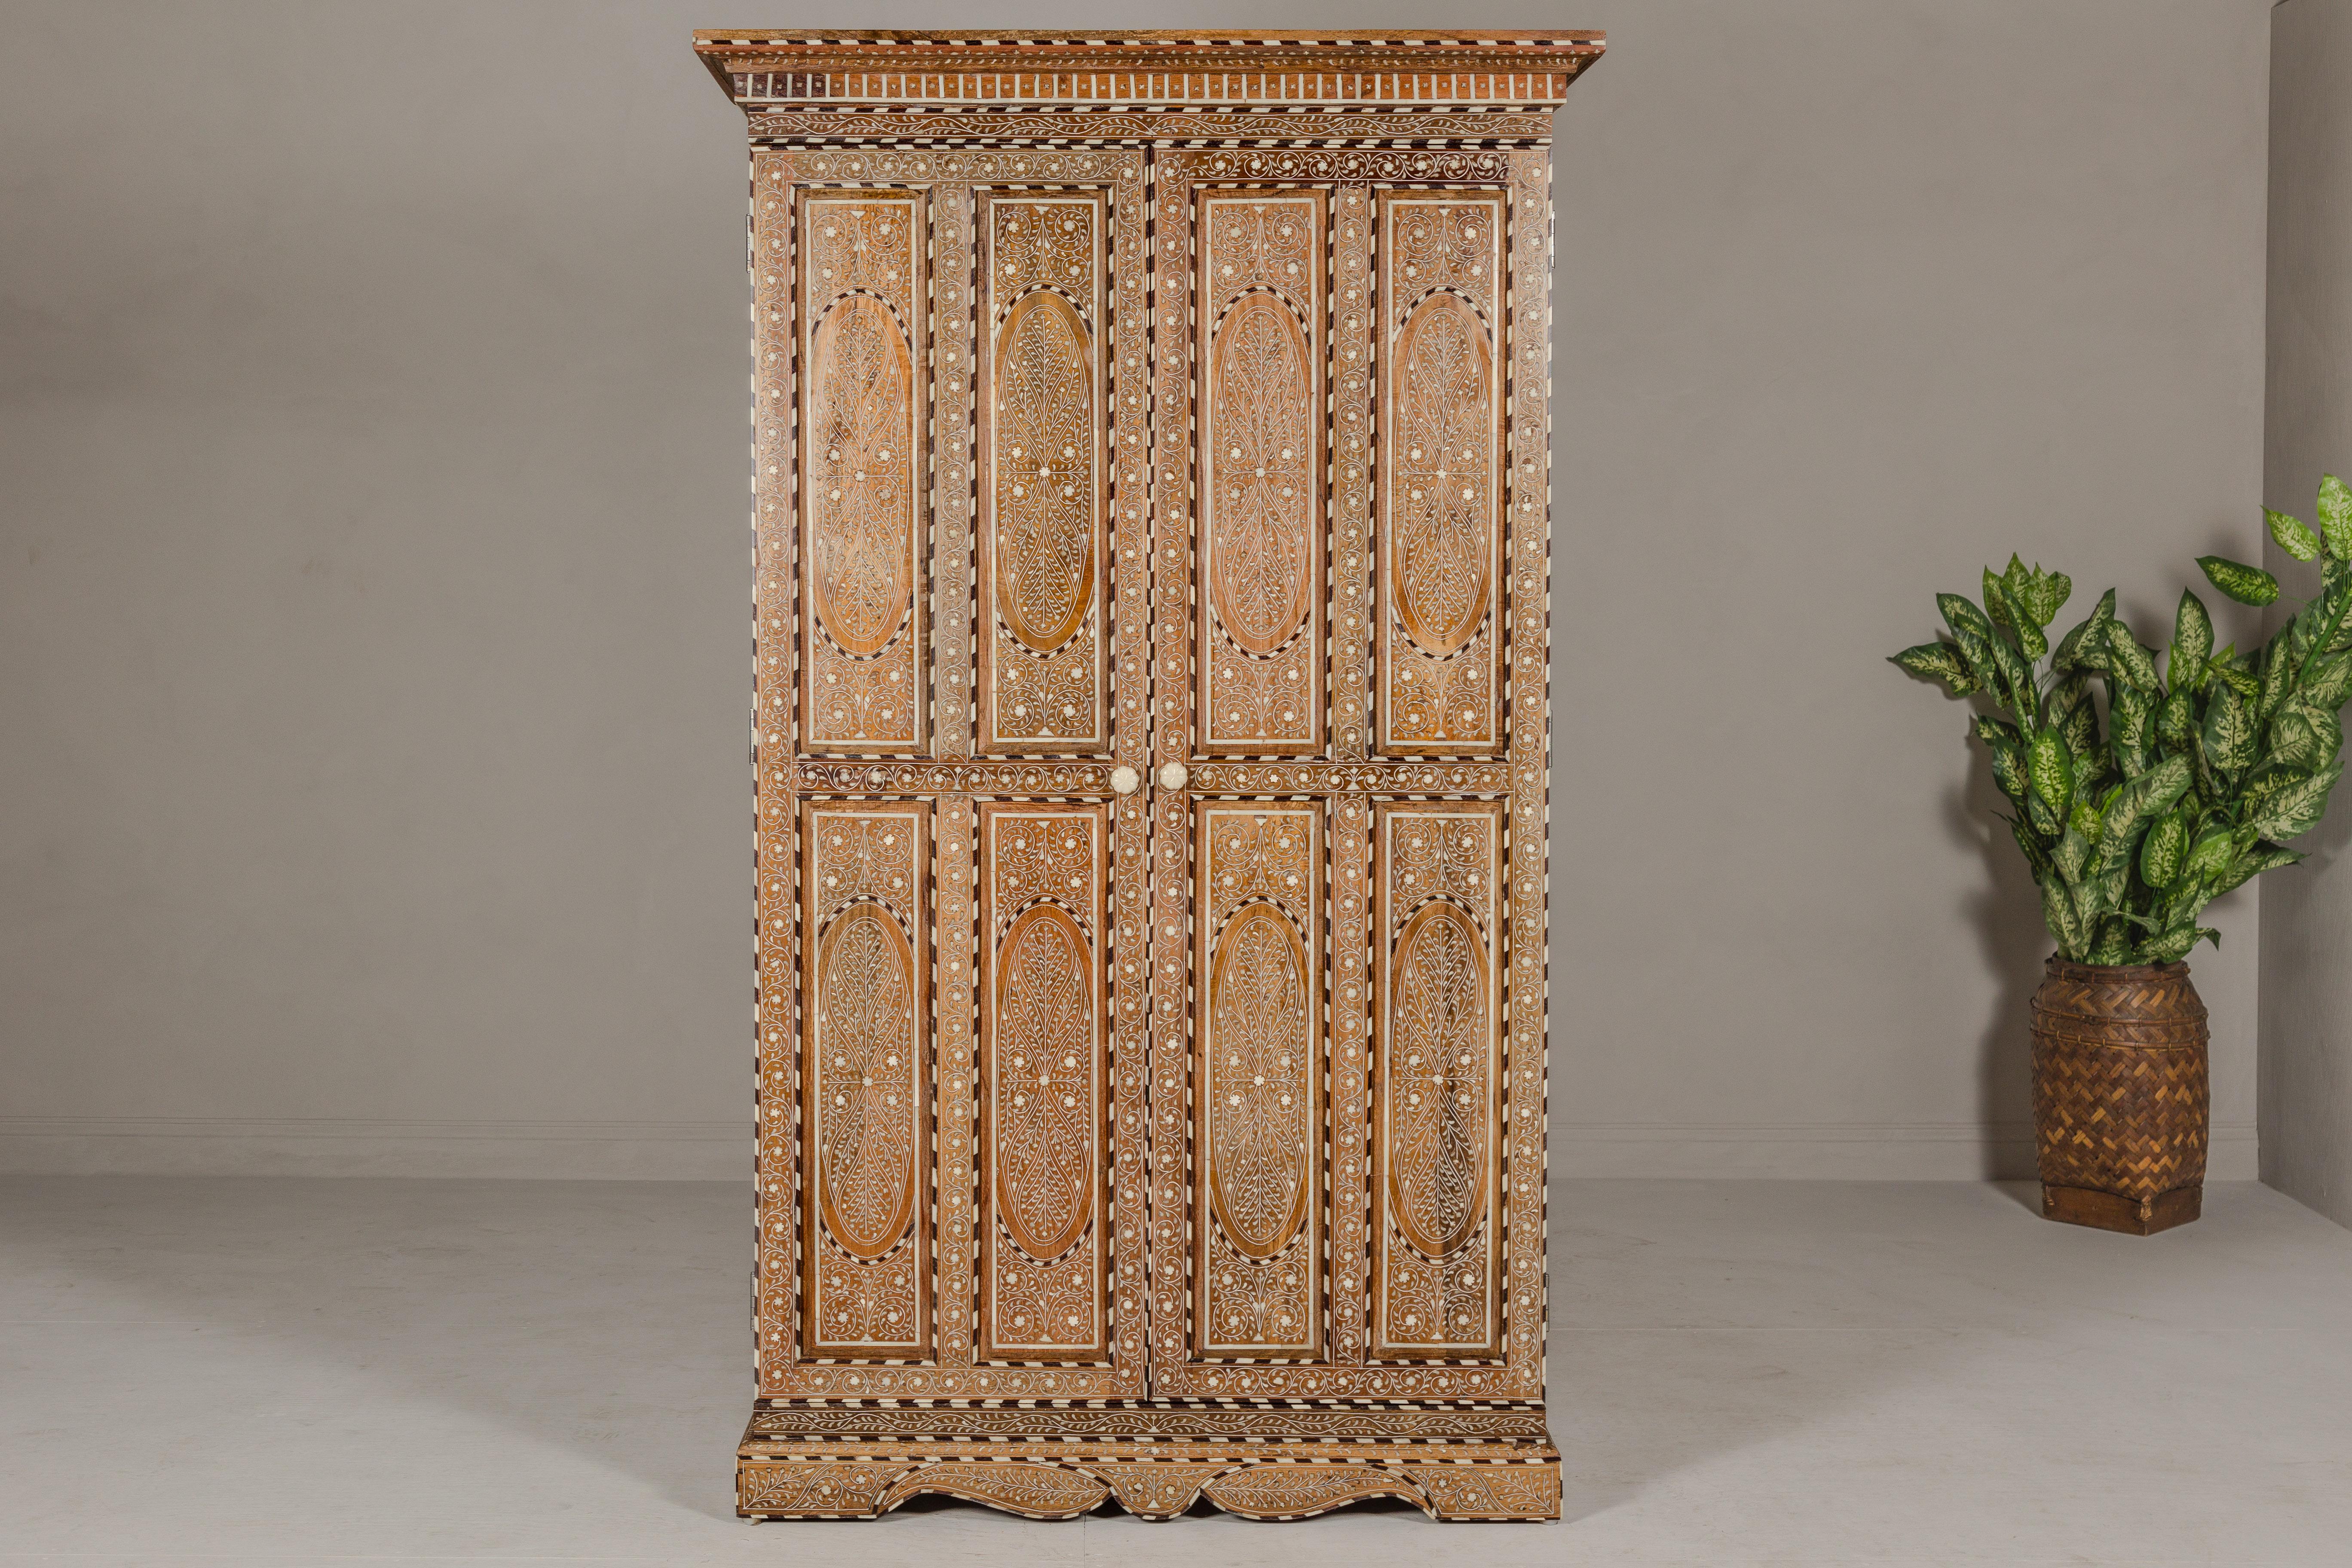 An Anglo-Indian style tall armoire made of mango wood and adorned with floral-themed bone inlay. Behold the magnificence of this Anglo-Indian style tall armoire, a true masterpiece crafted from the robust and warm-hued mango wood. Adorned with an